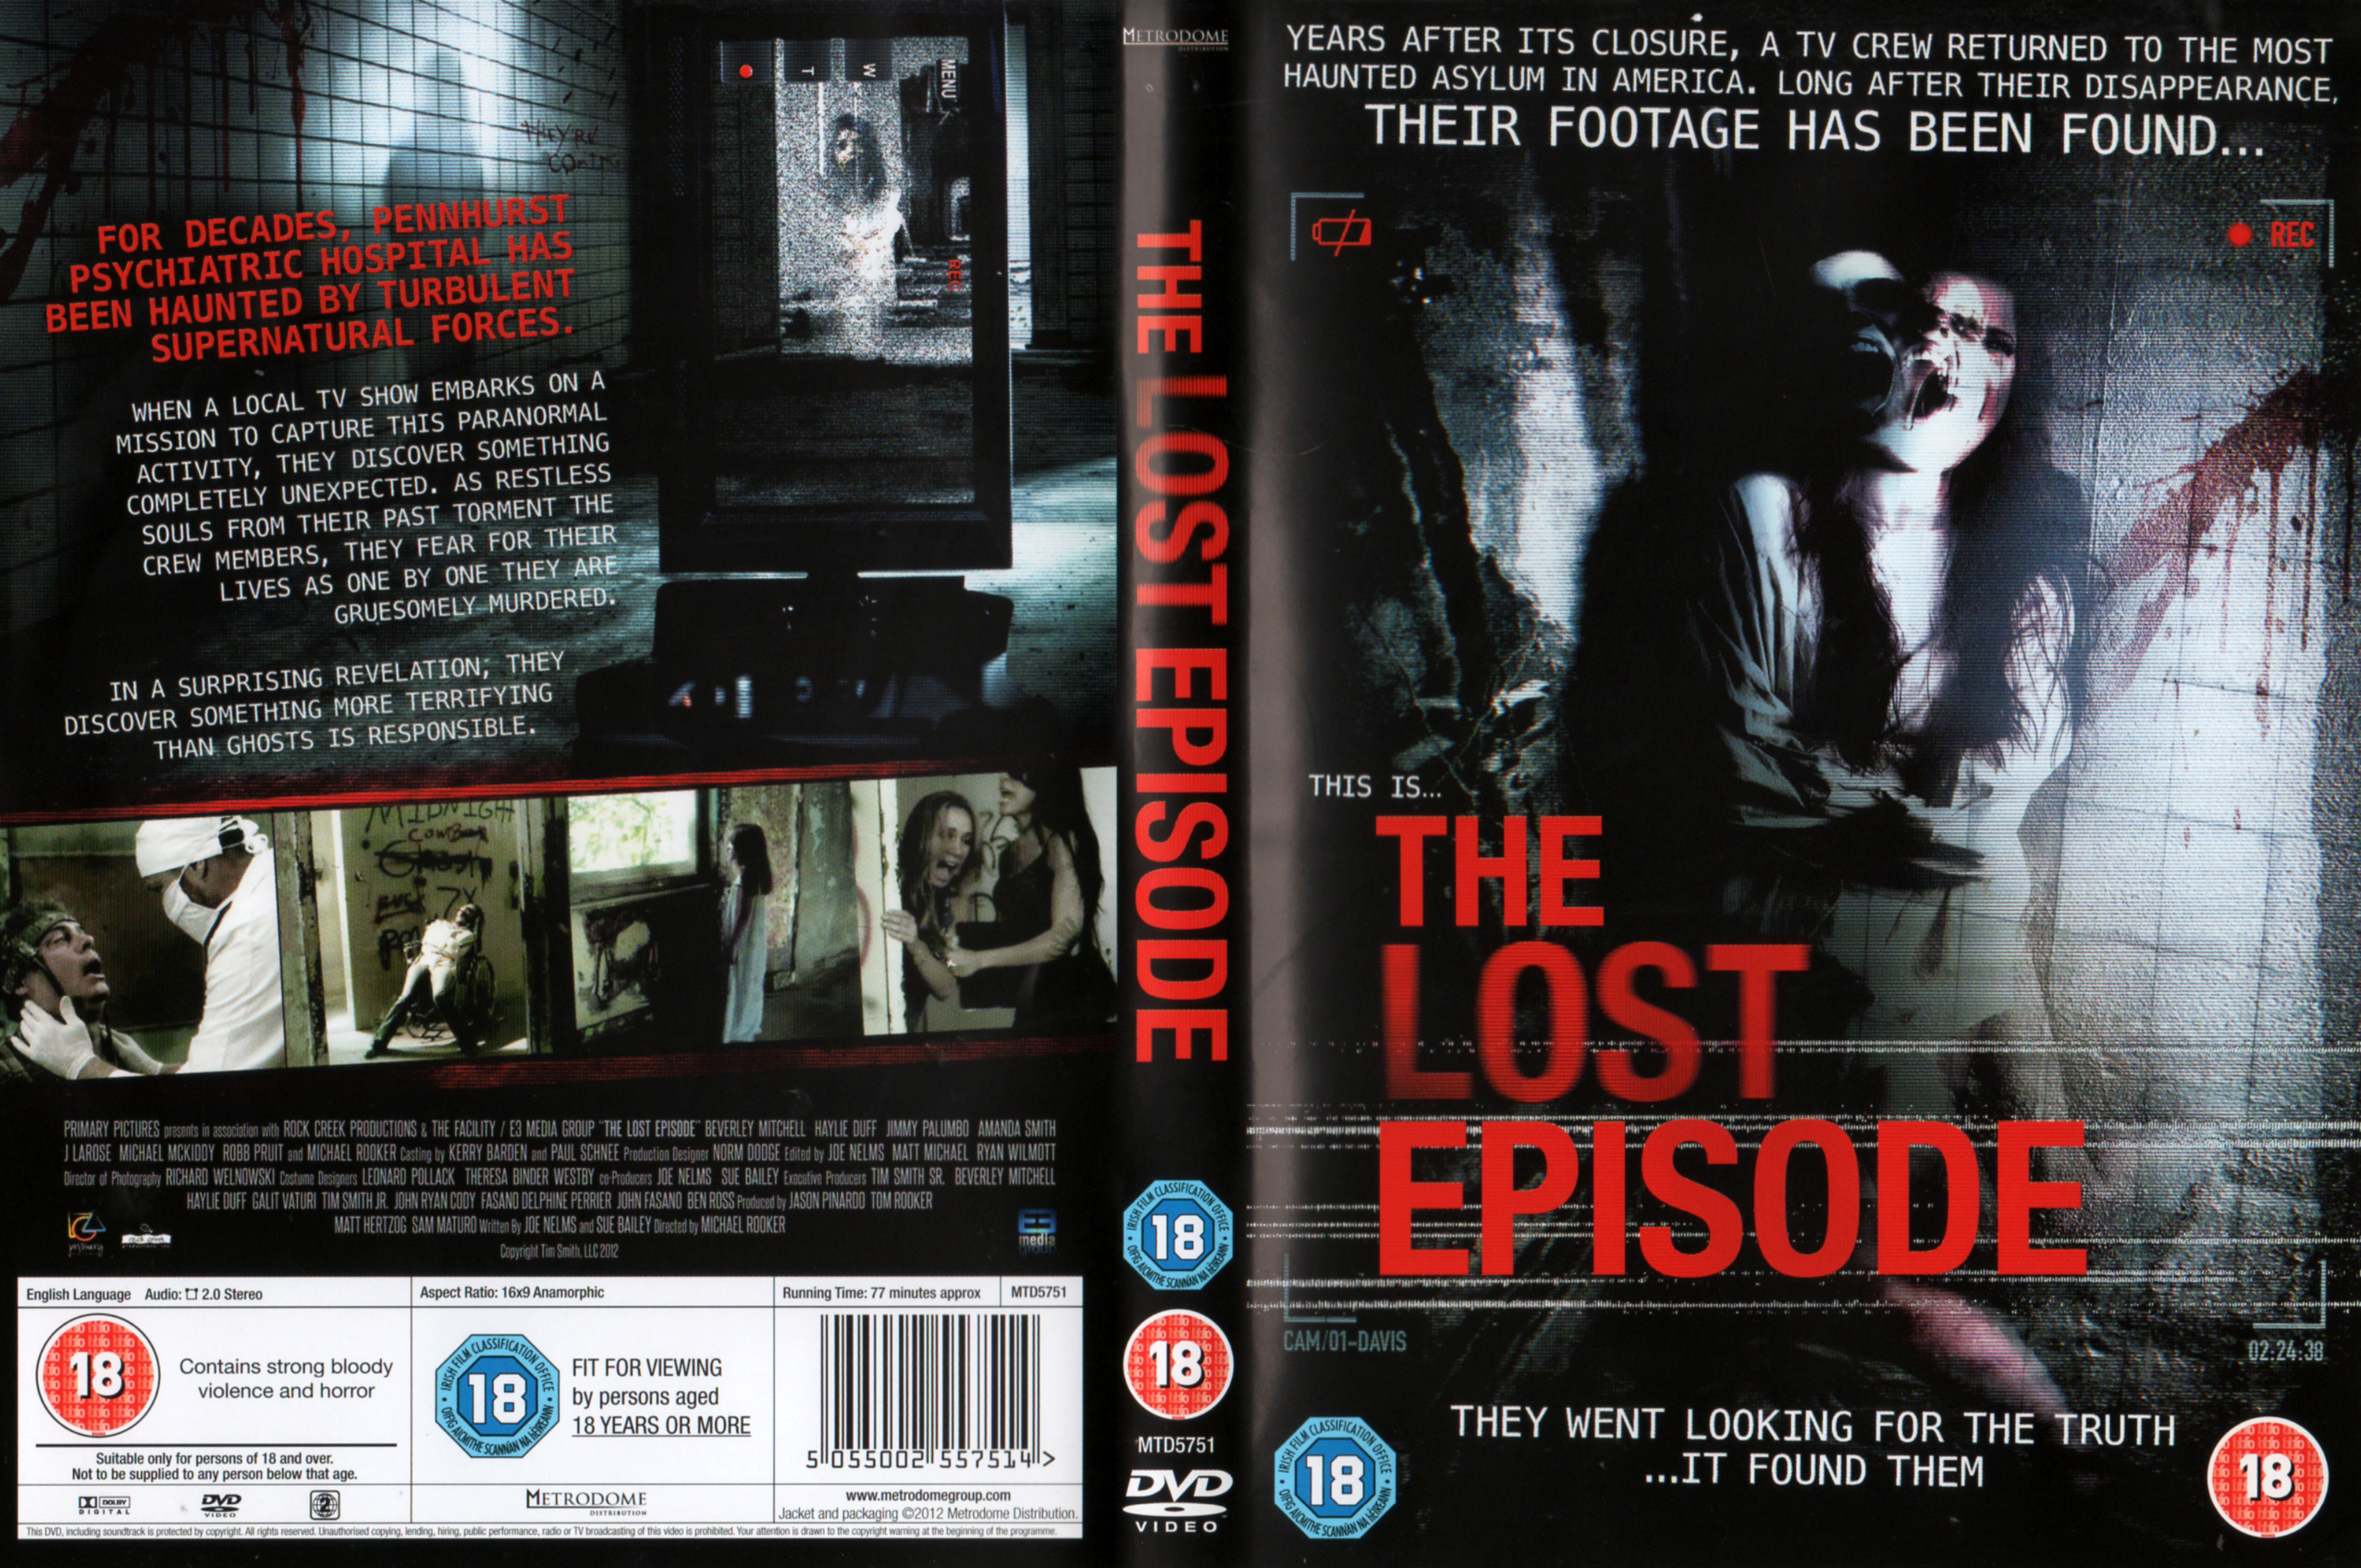 Jaquette DVD The lost episode Zone 1